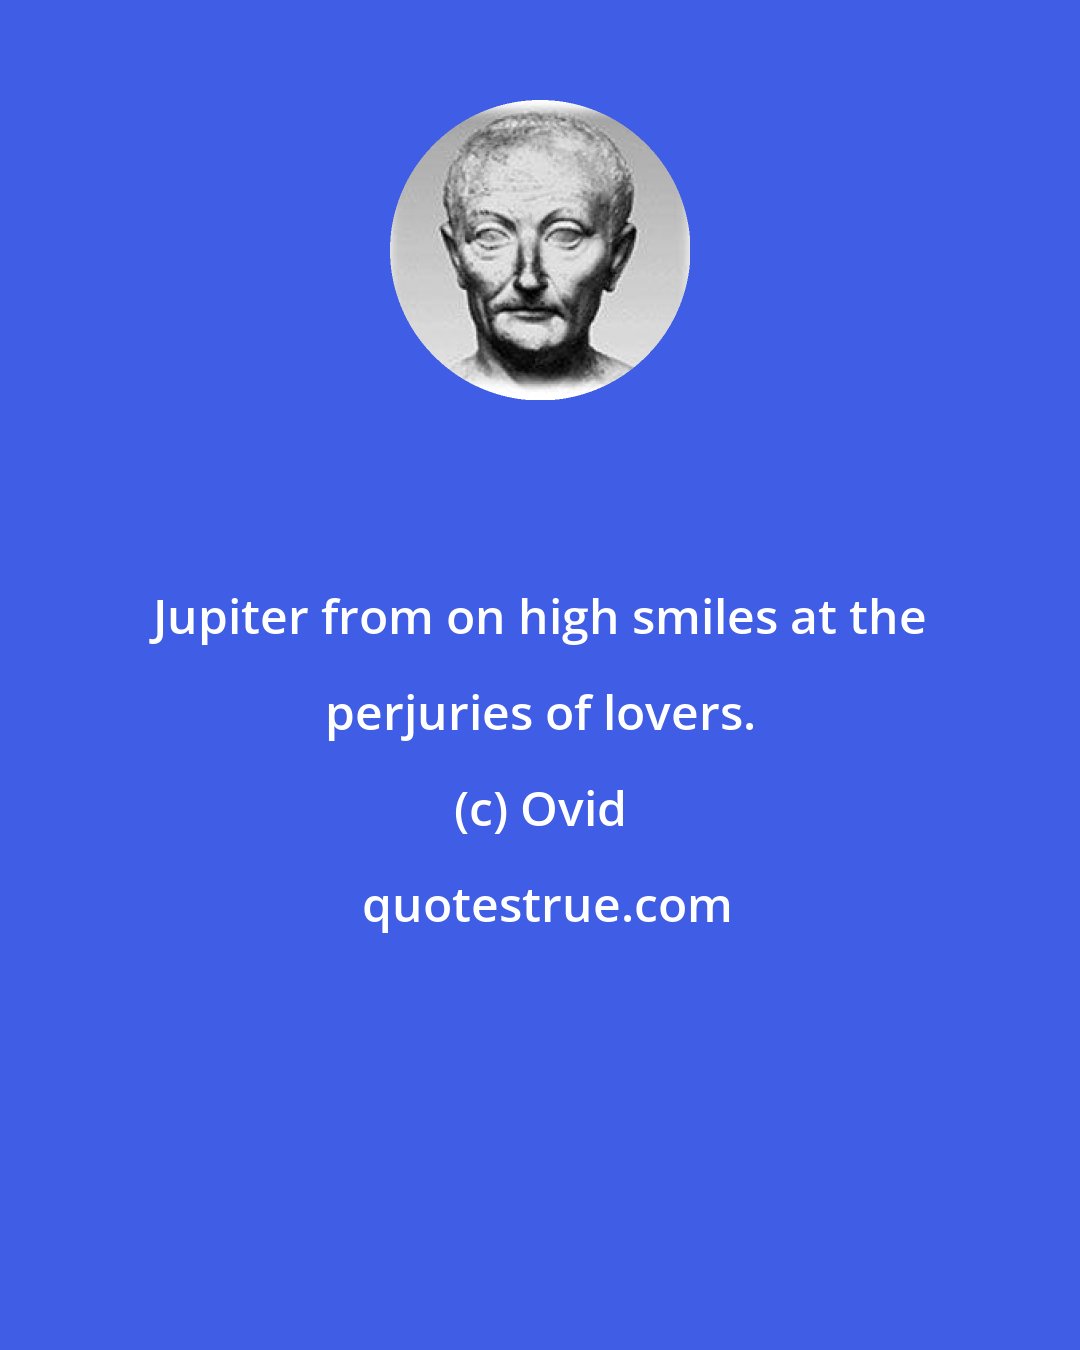 Ovid: Jupiter from on high smiles at the perjuries of lovers.